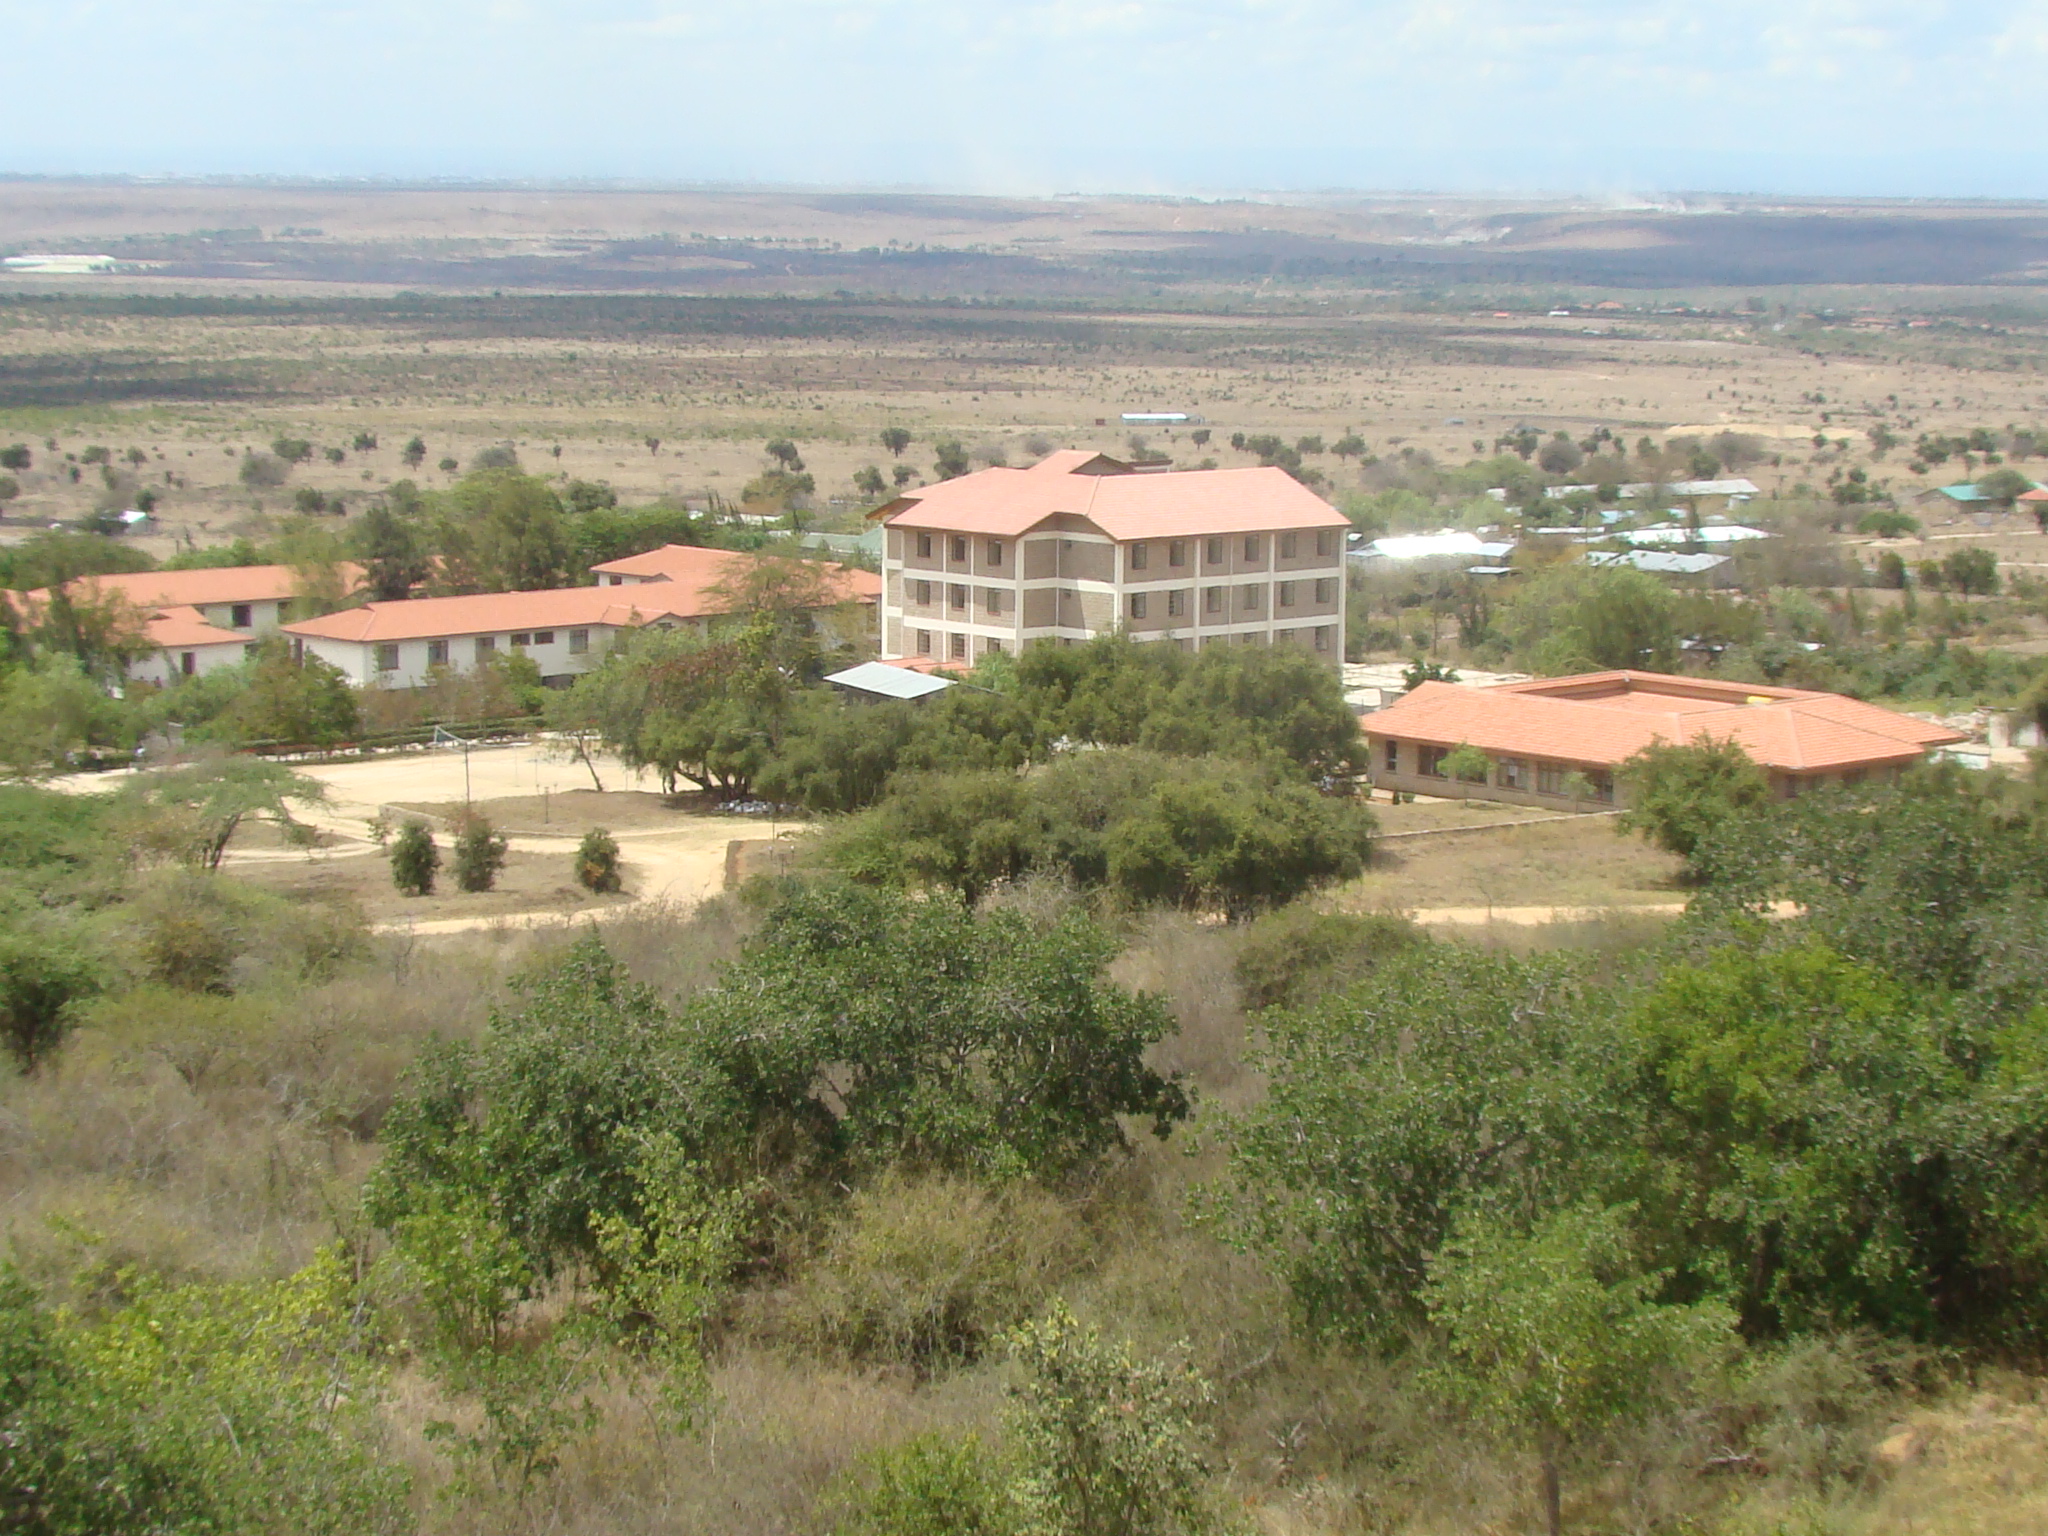   Student Domitories - Athi River Campus  